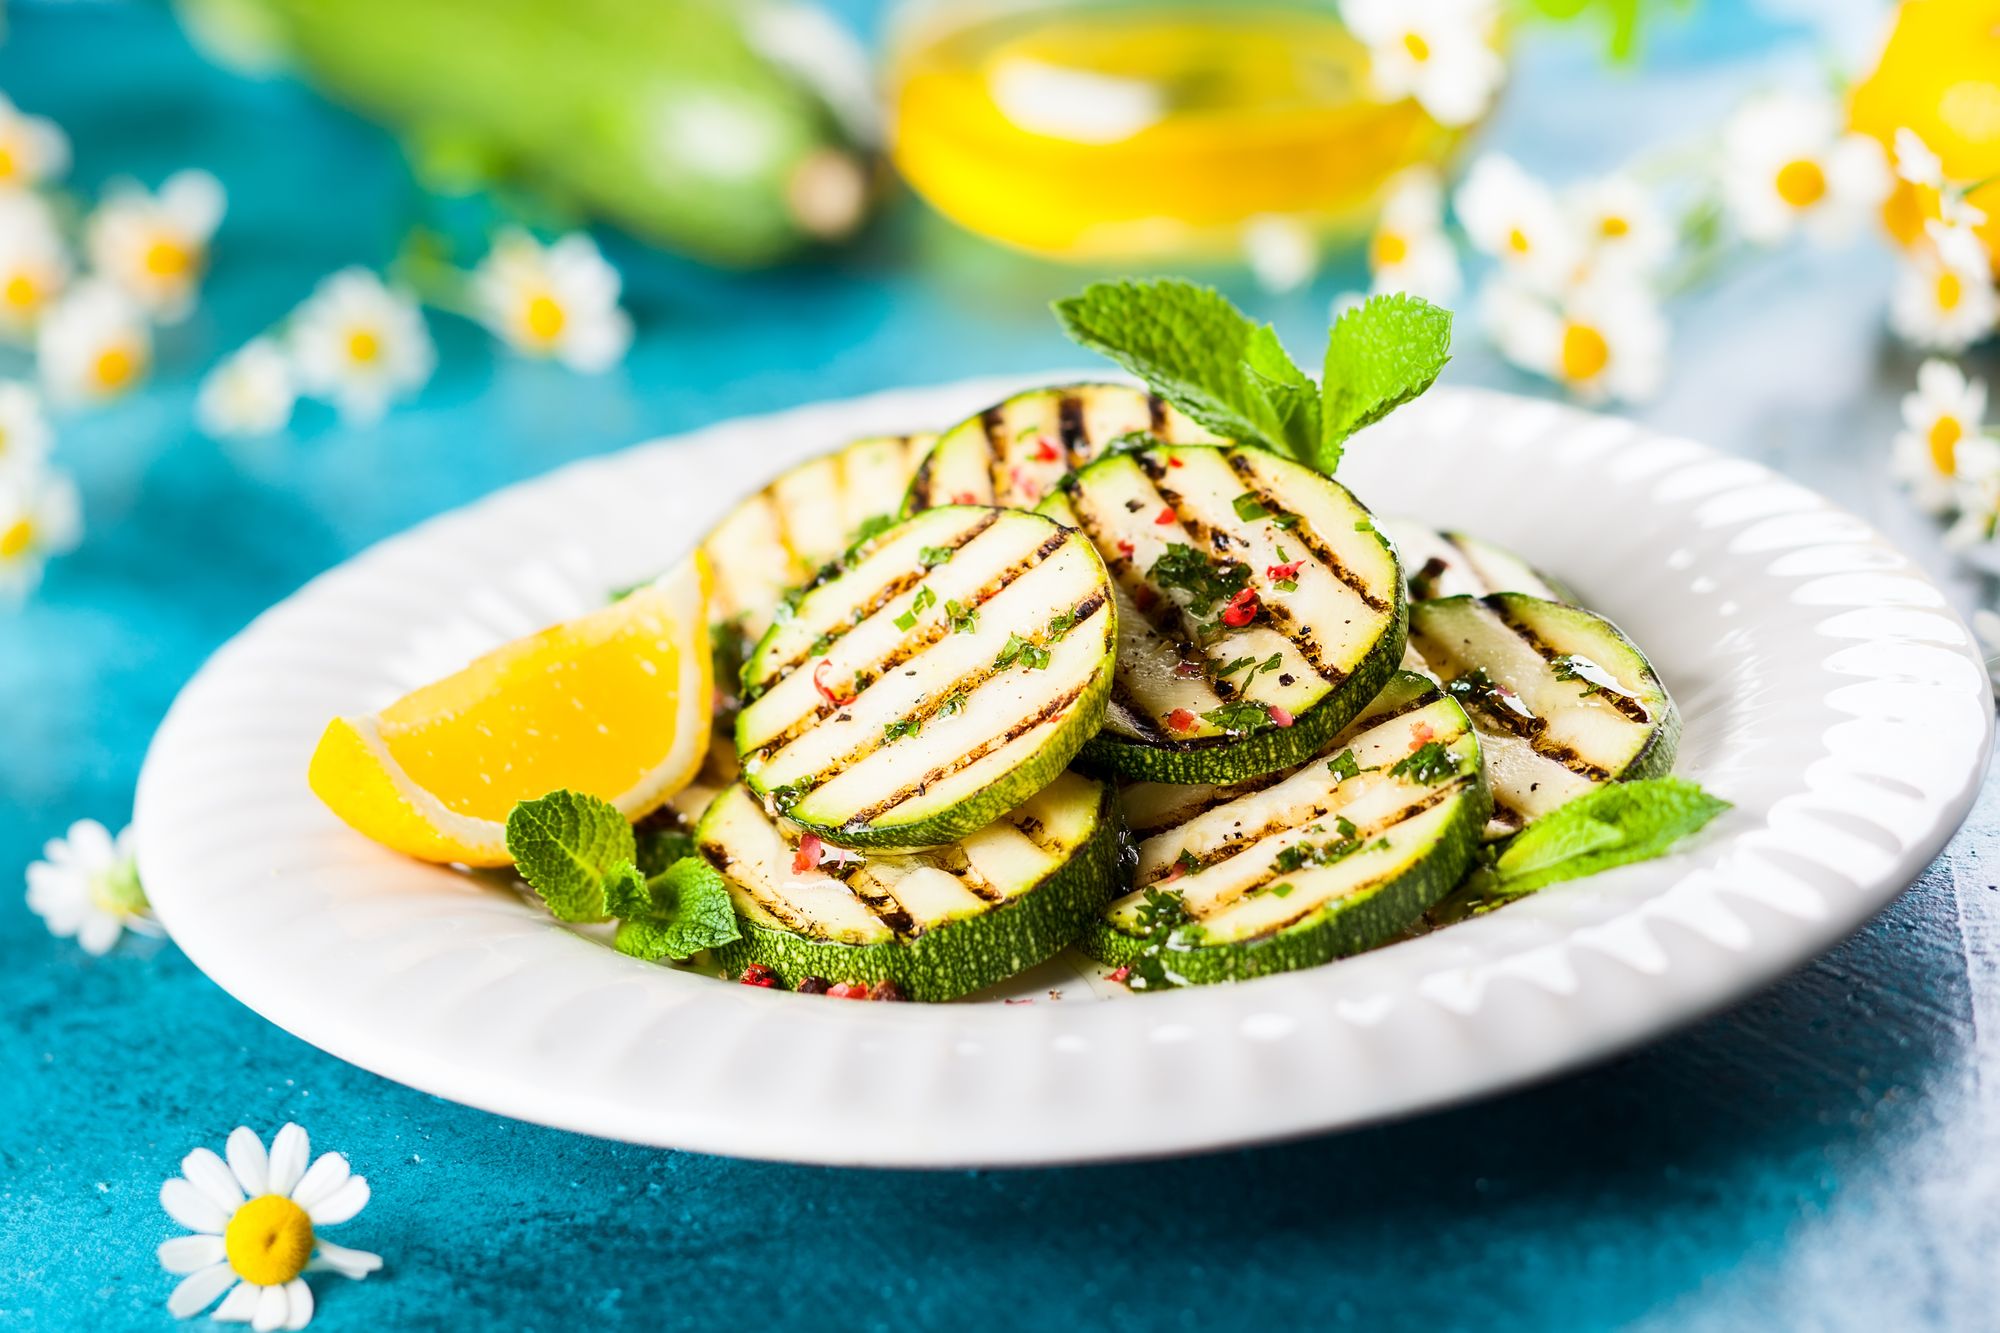 Chargrilled Zucchini/Courgette Salad